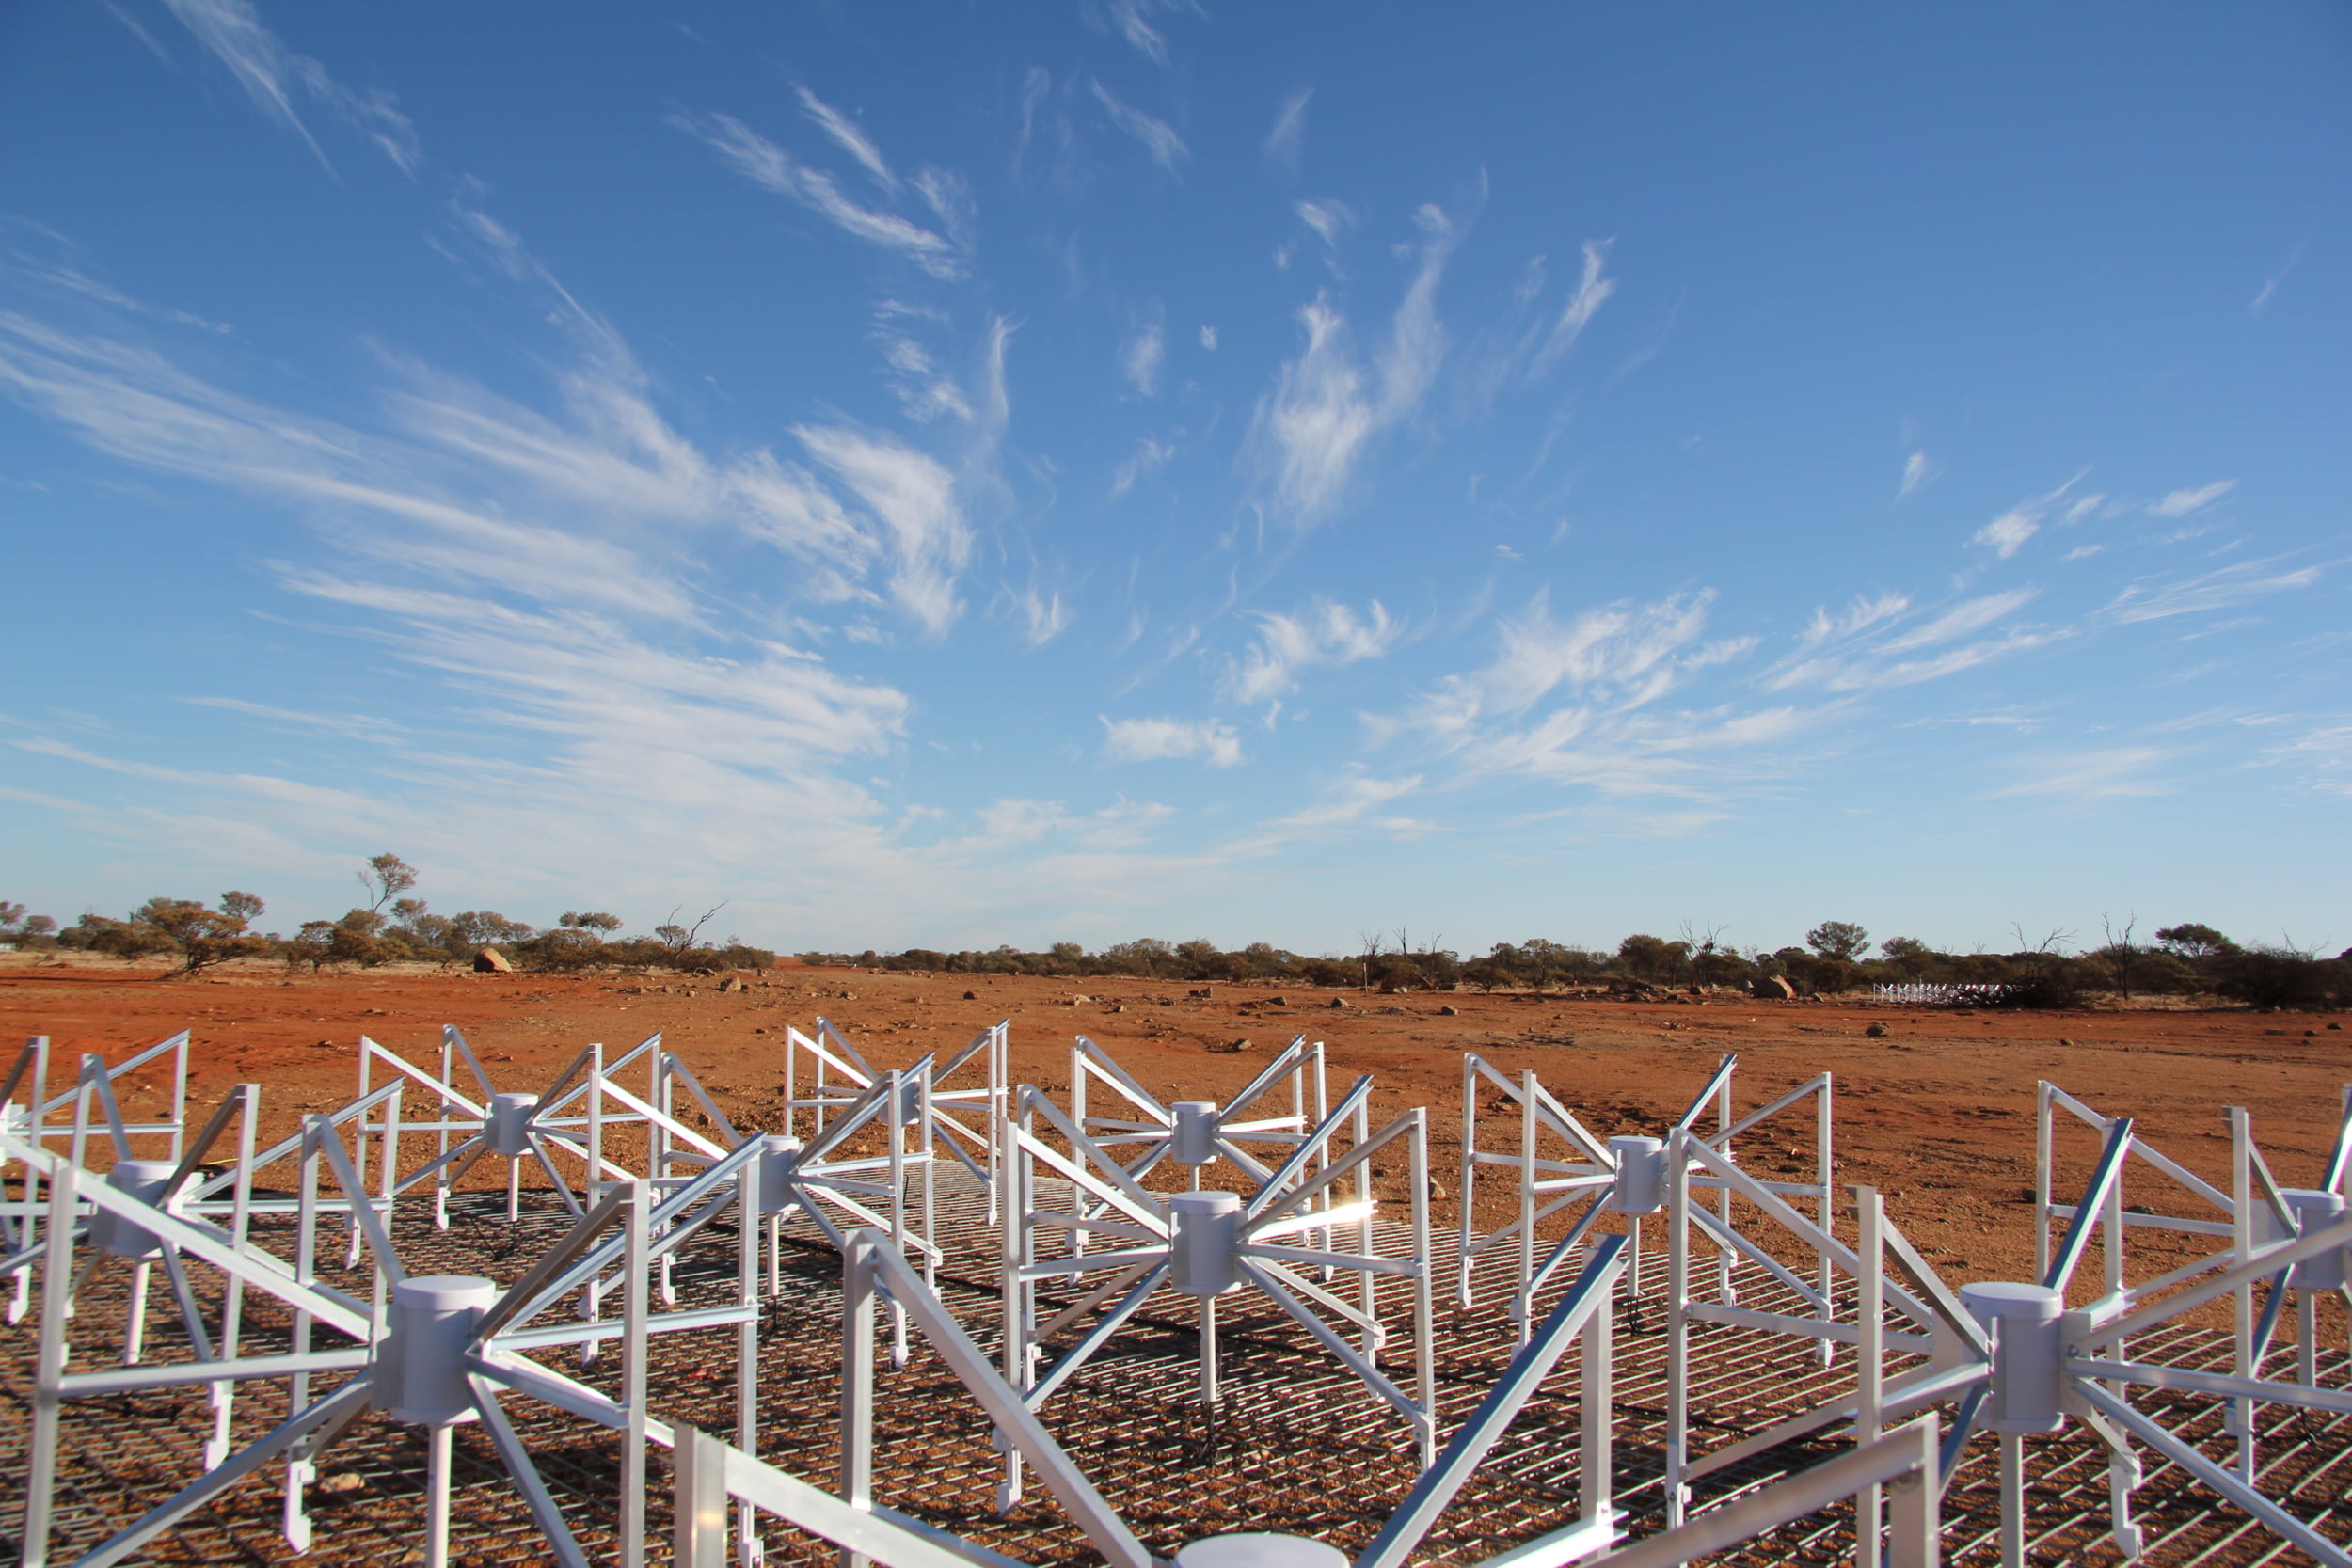 A tile of the Murchison Widefield Array telescope. Credit: ICRAR.